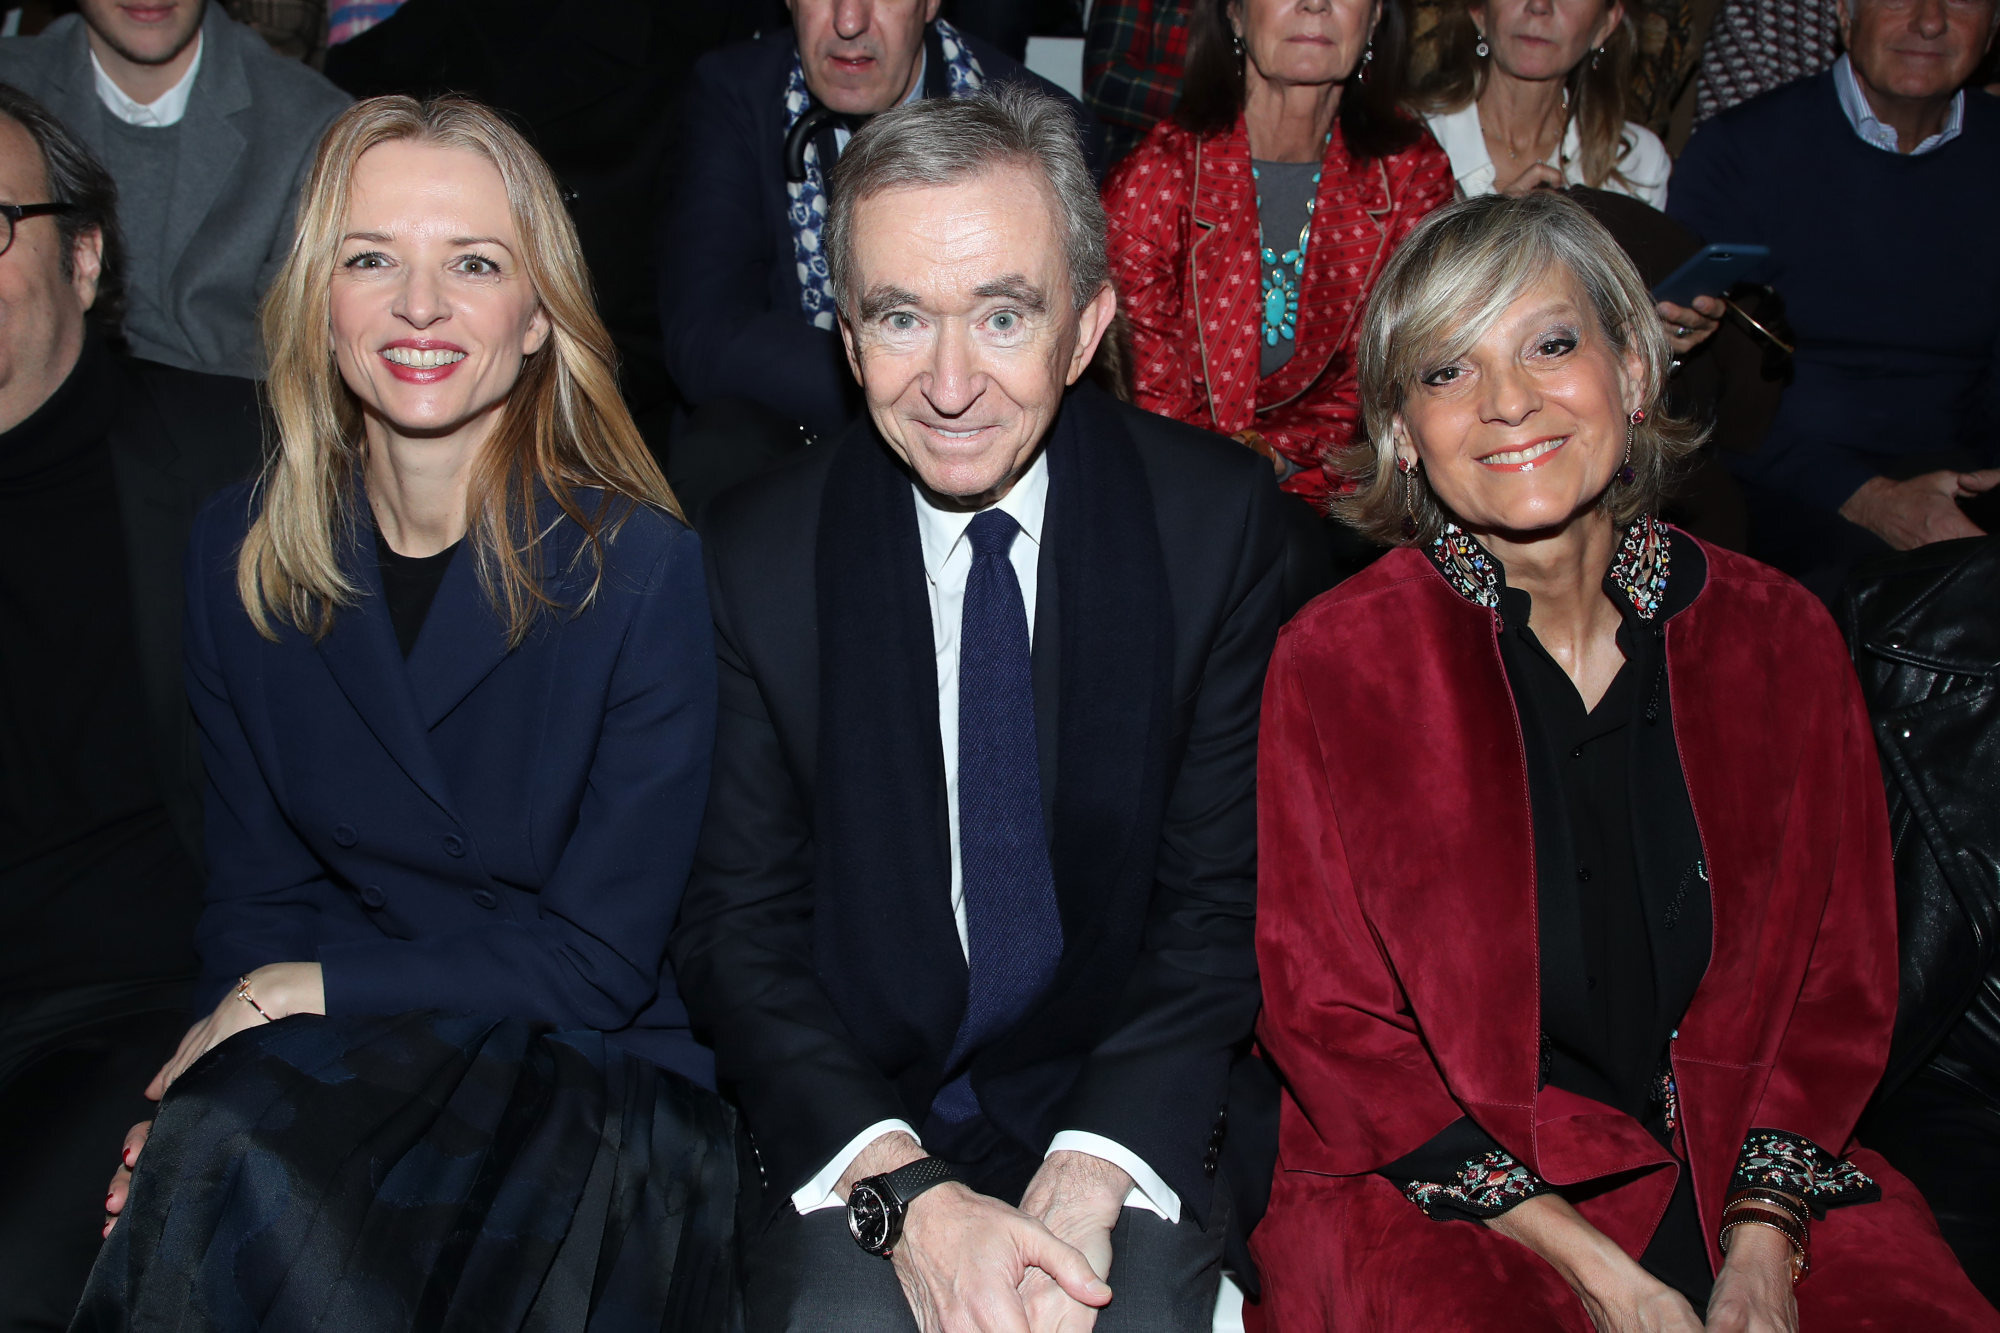 The Future of Luxury: Who Will Succeed Bernard Arnault at LVMH